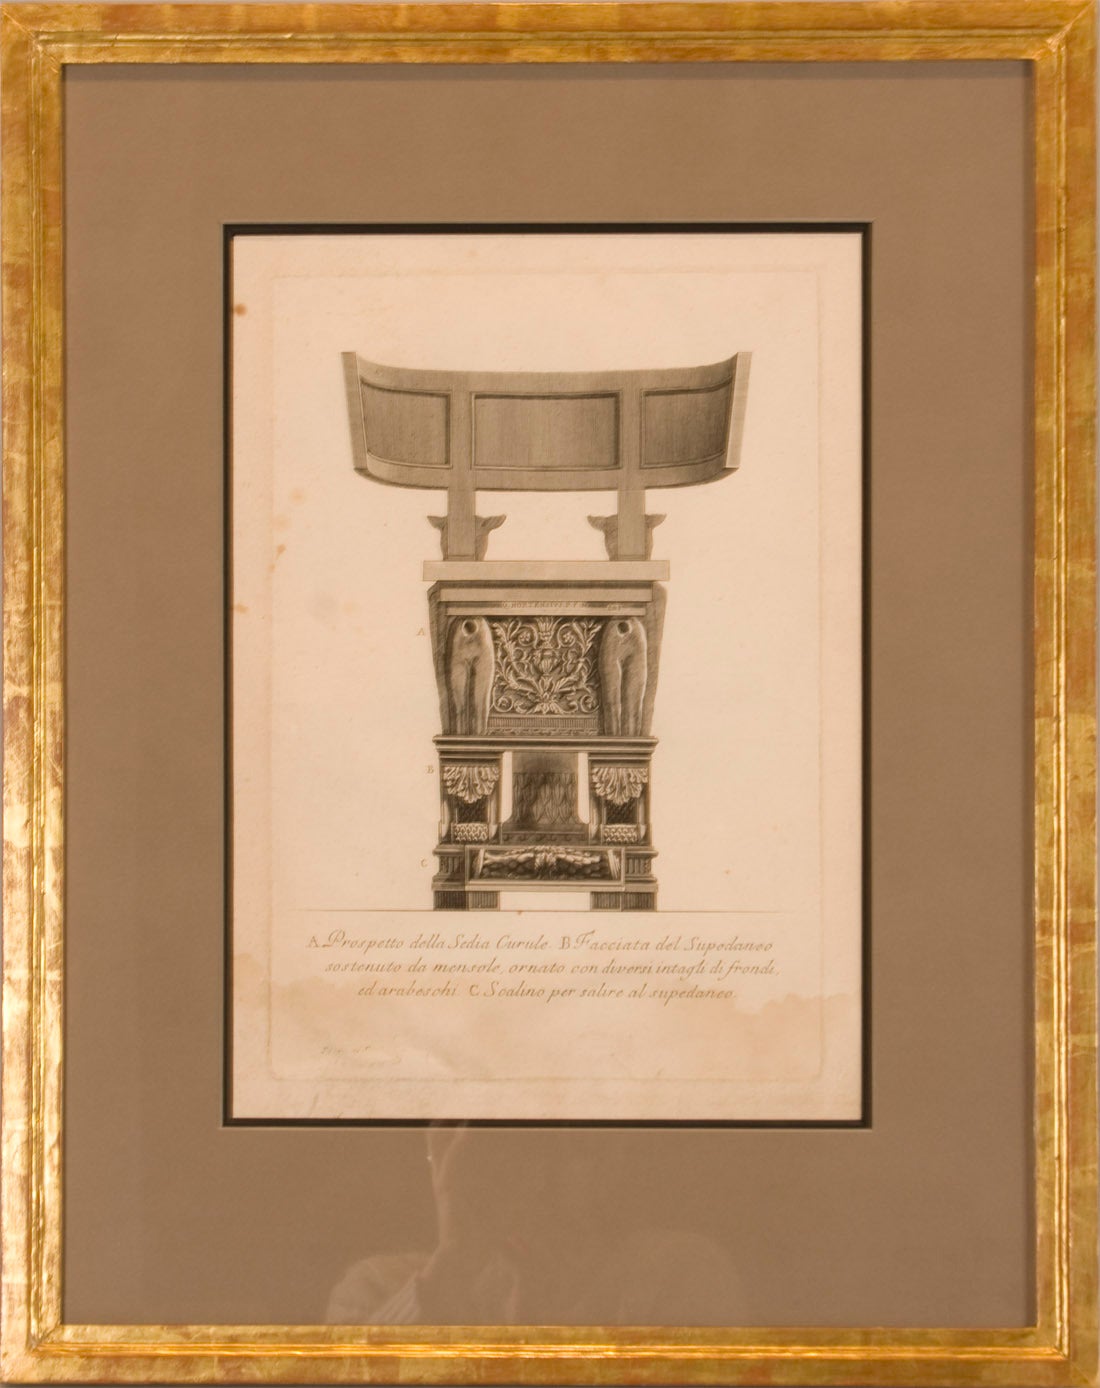 Set of etchings of views of a Greek ceremonial klismos chair. 
In his fifties, G.B. Piranesi was interested in archaeology and studied in Southern Italy where he produced drawings of Greek architecture. 
Medium: Etching on laid paper.
Year: circa